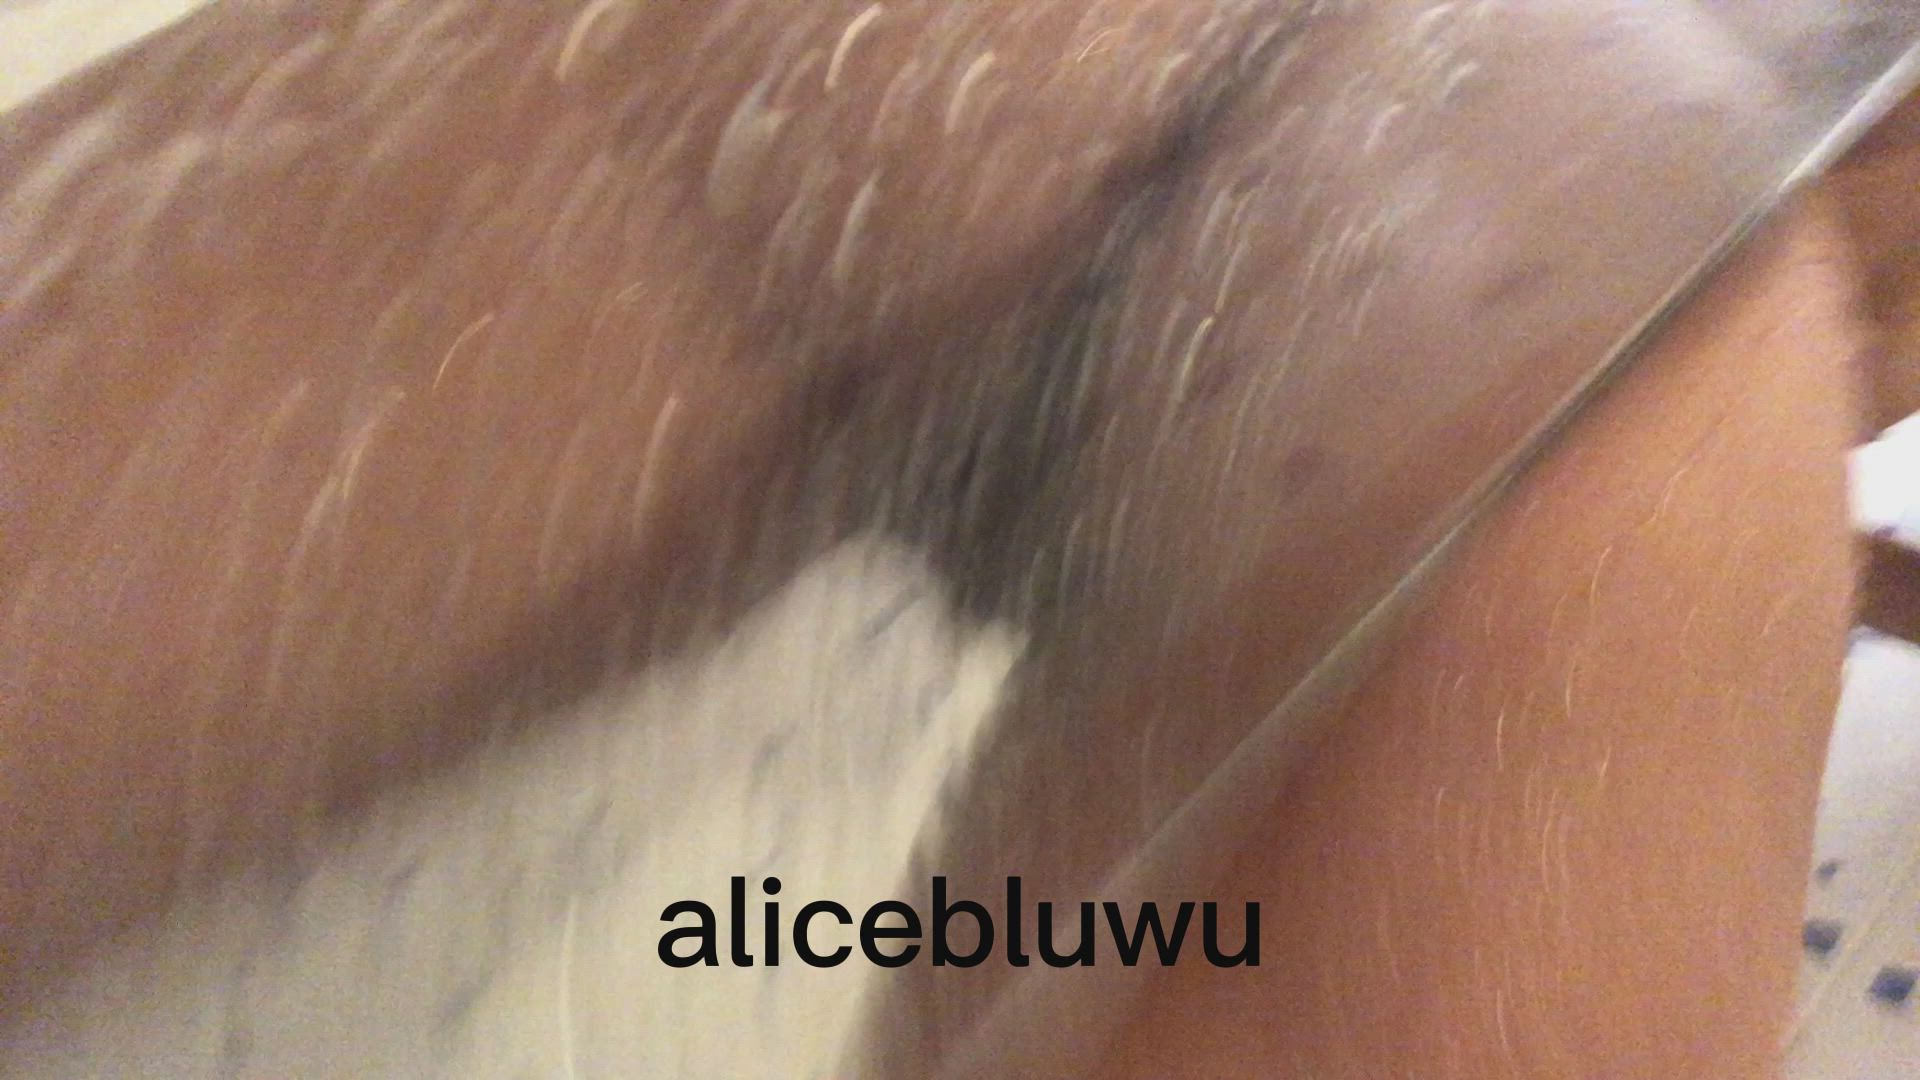 Ass porn video with onlyfans model Alicebluwu <strong>@alicebluwu</strong>